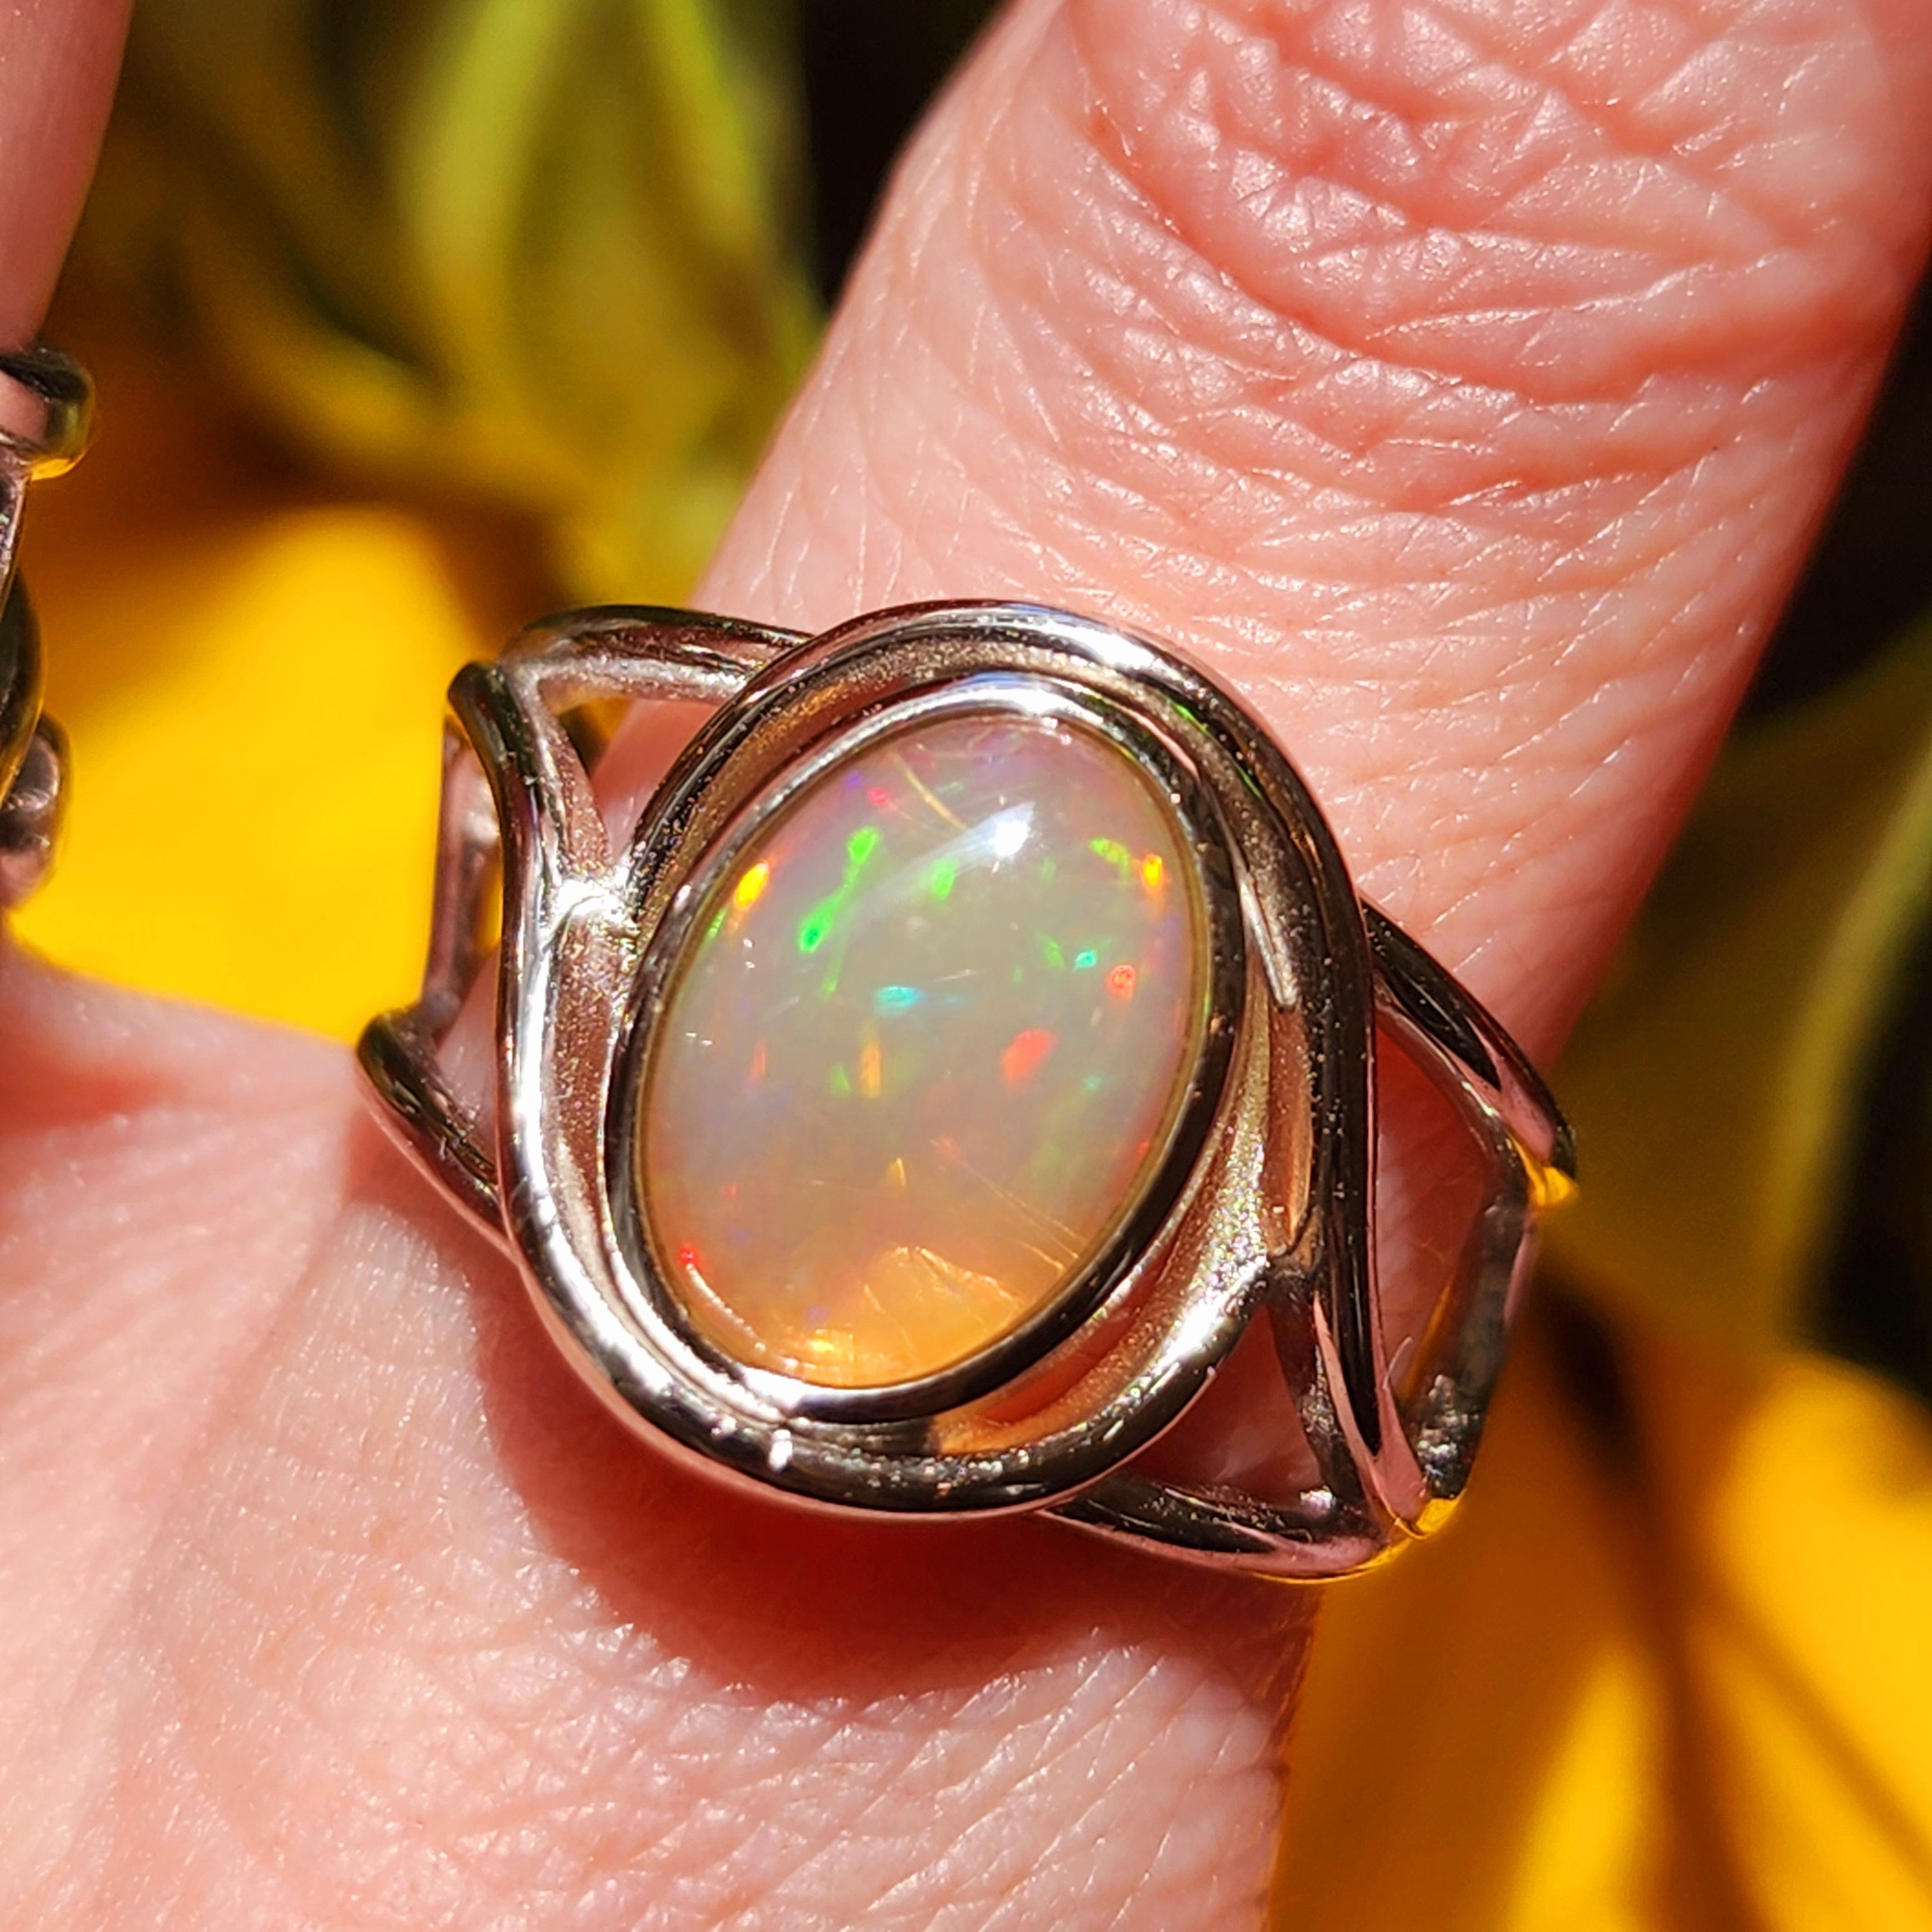 Welo Opal Finger Cuff Adjustable Ring .925 Silver for Good Luck, Transformation and Joy